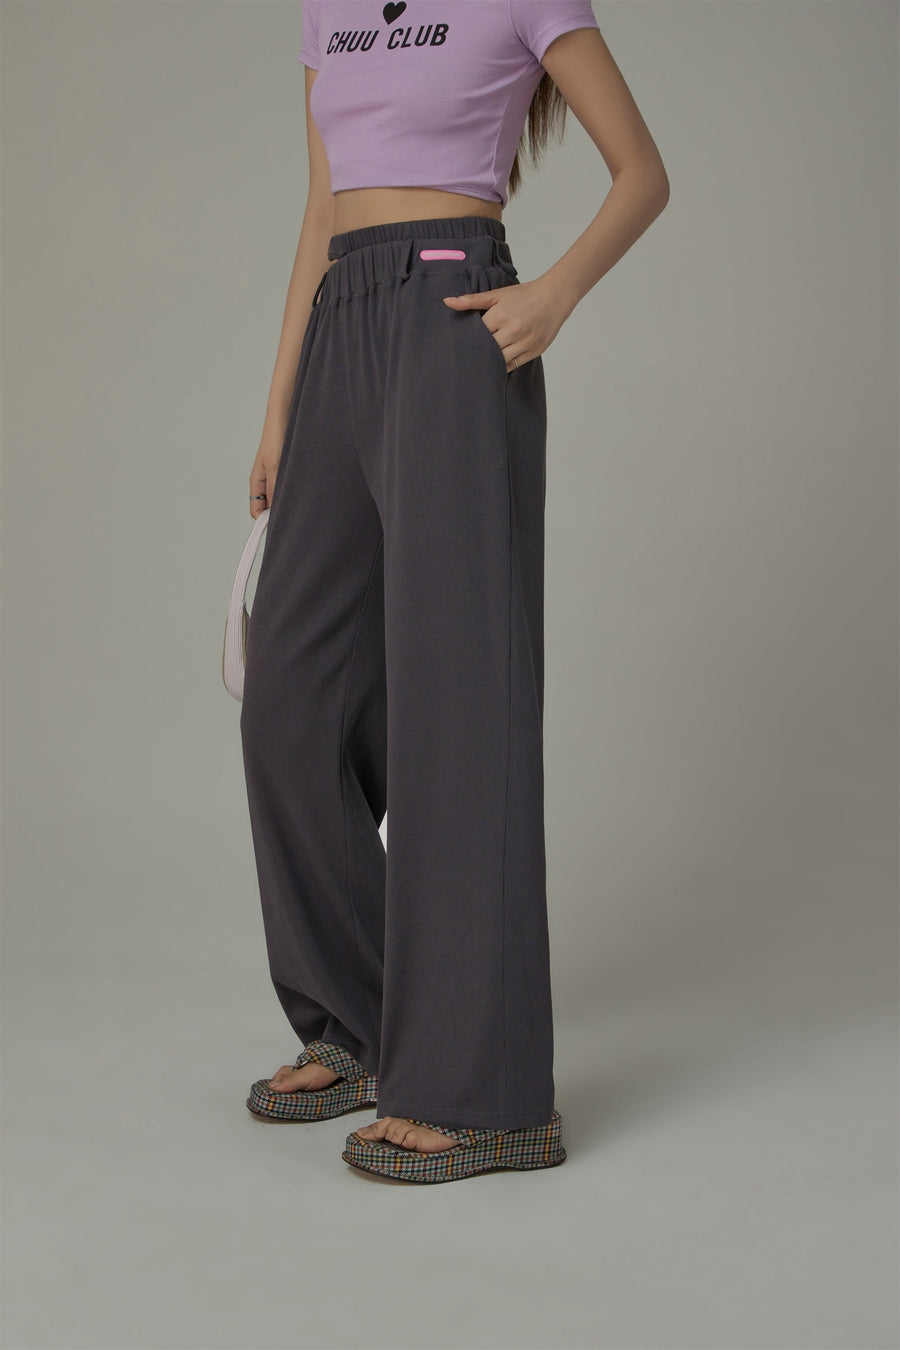 CHUU Banding Loose Fit Slit Daily Pants